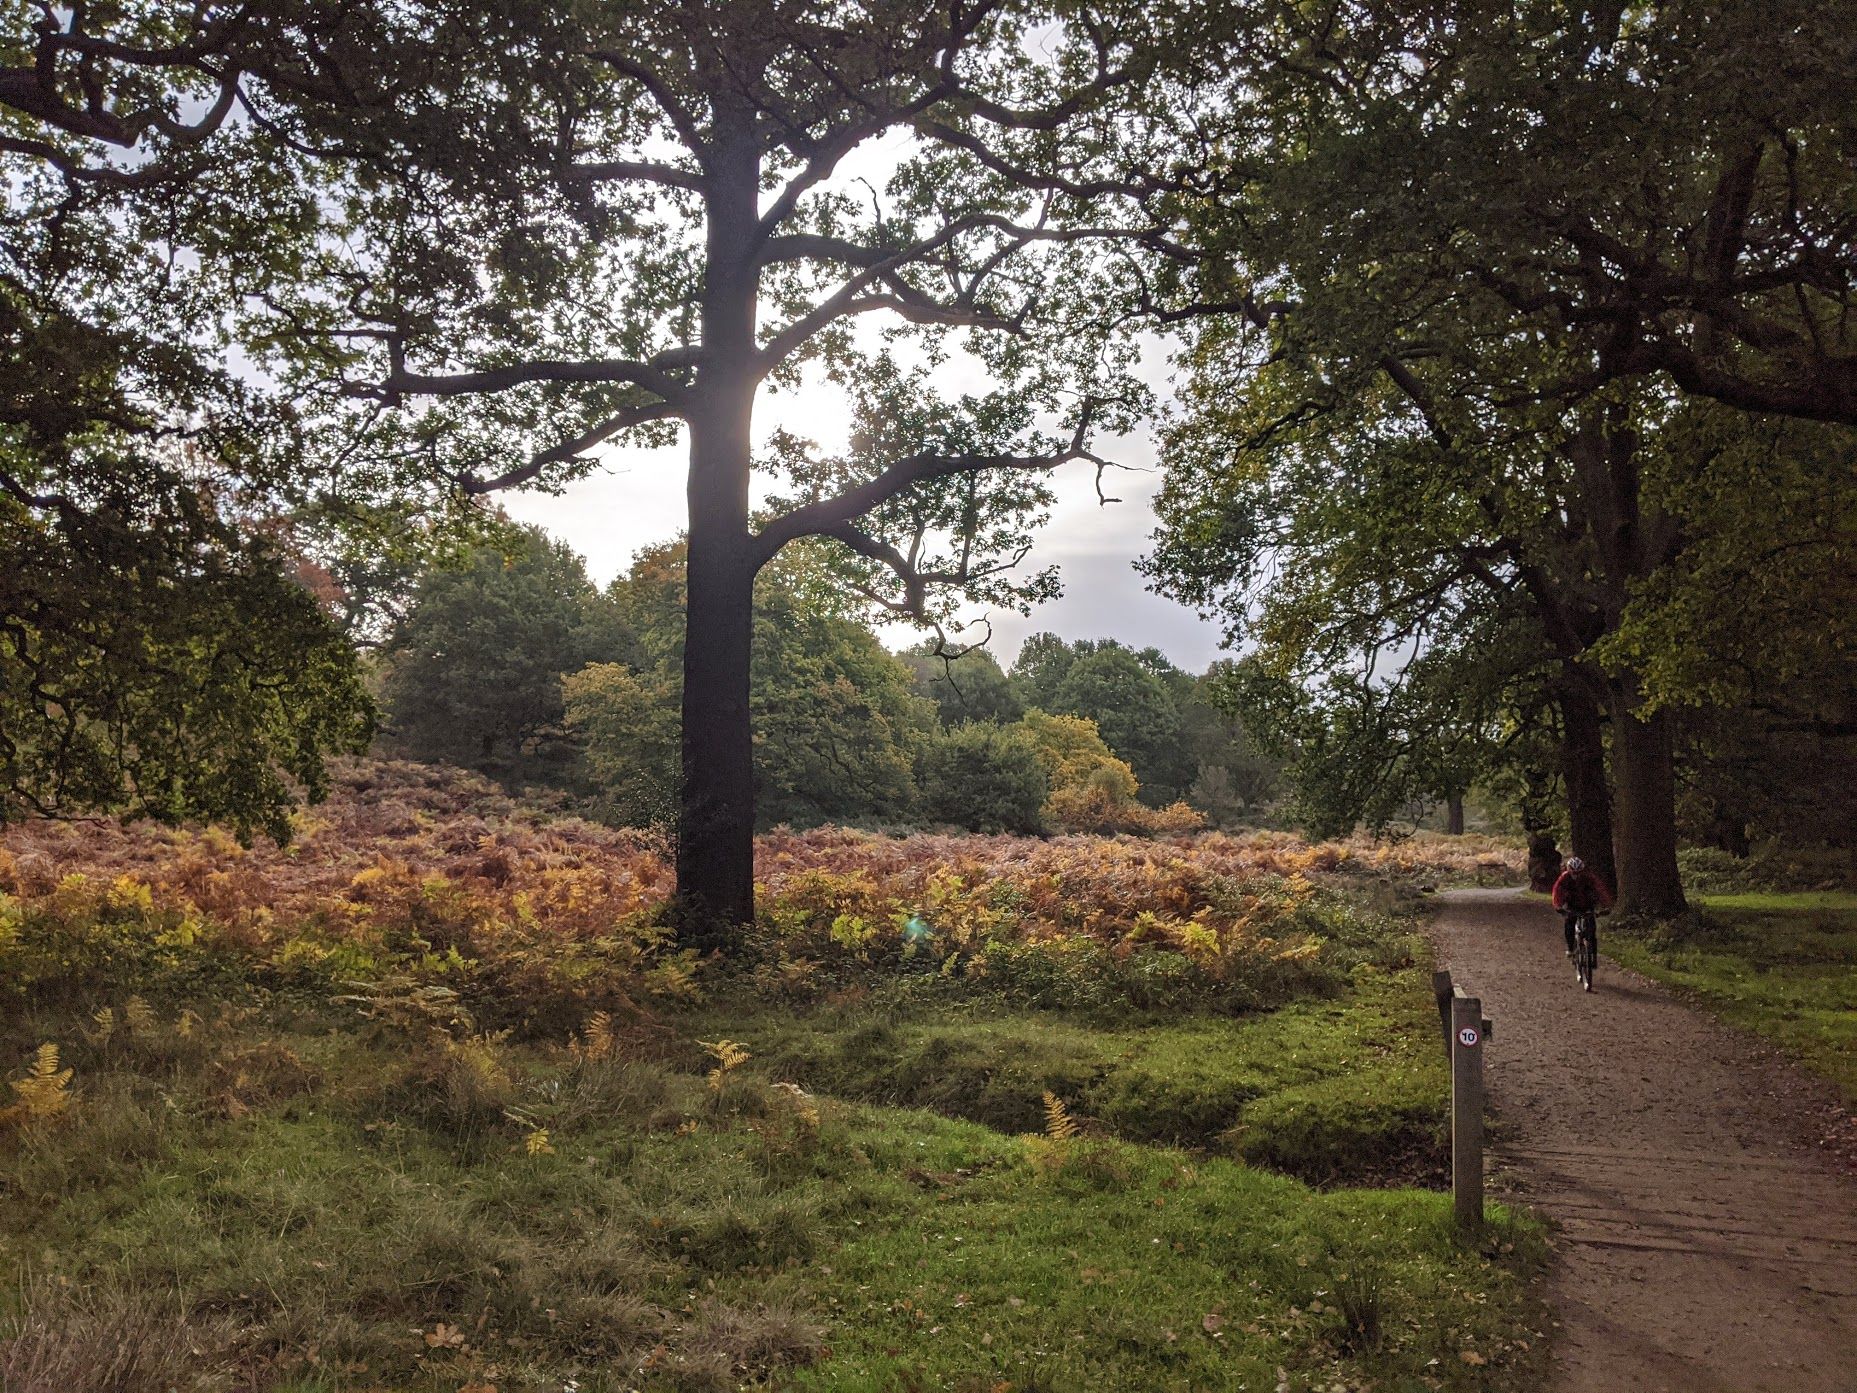 Cycling in Richmond Park